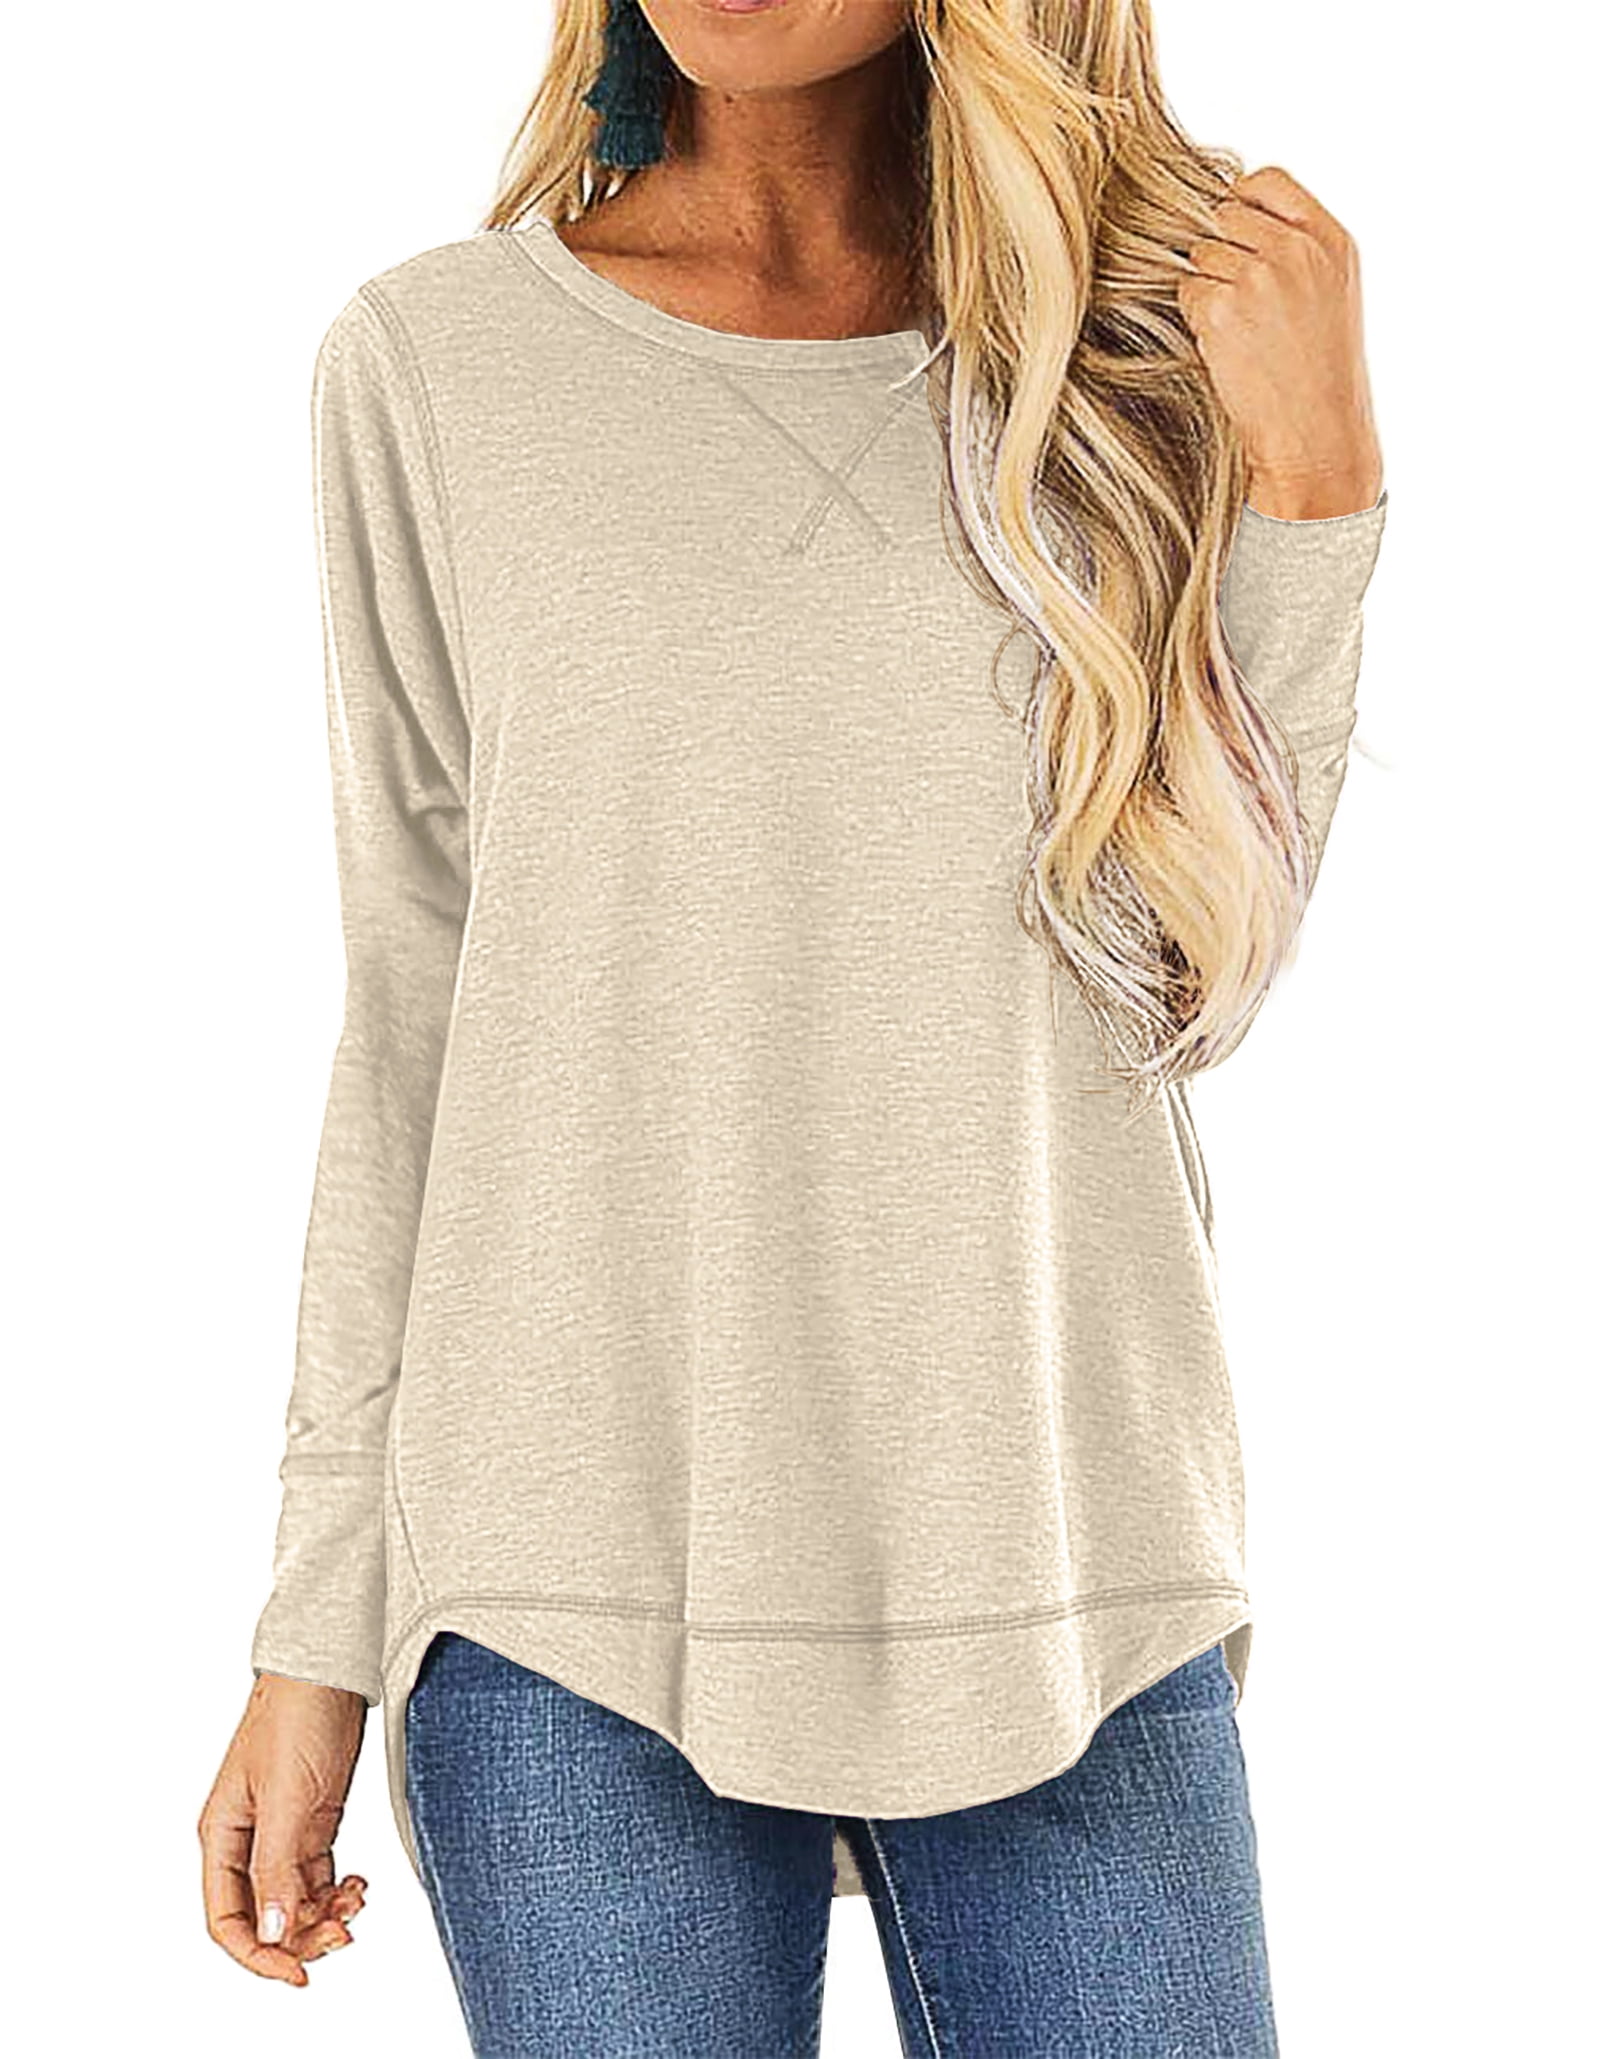 HOWCOME Fall Long Sleeve Side Split Casual Loose Tunic Womens Blouses ...